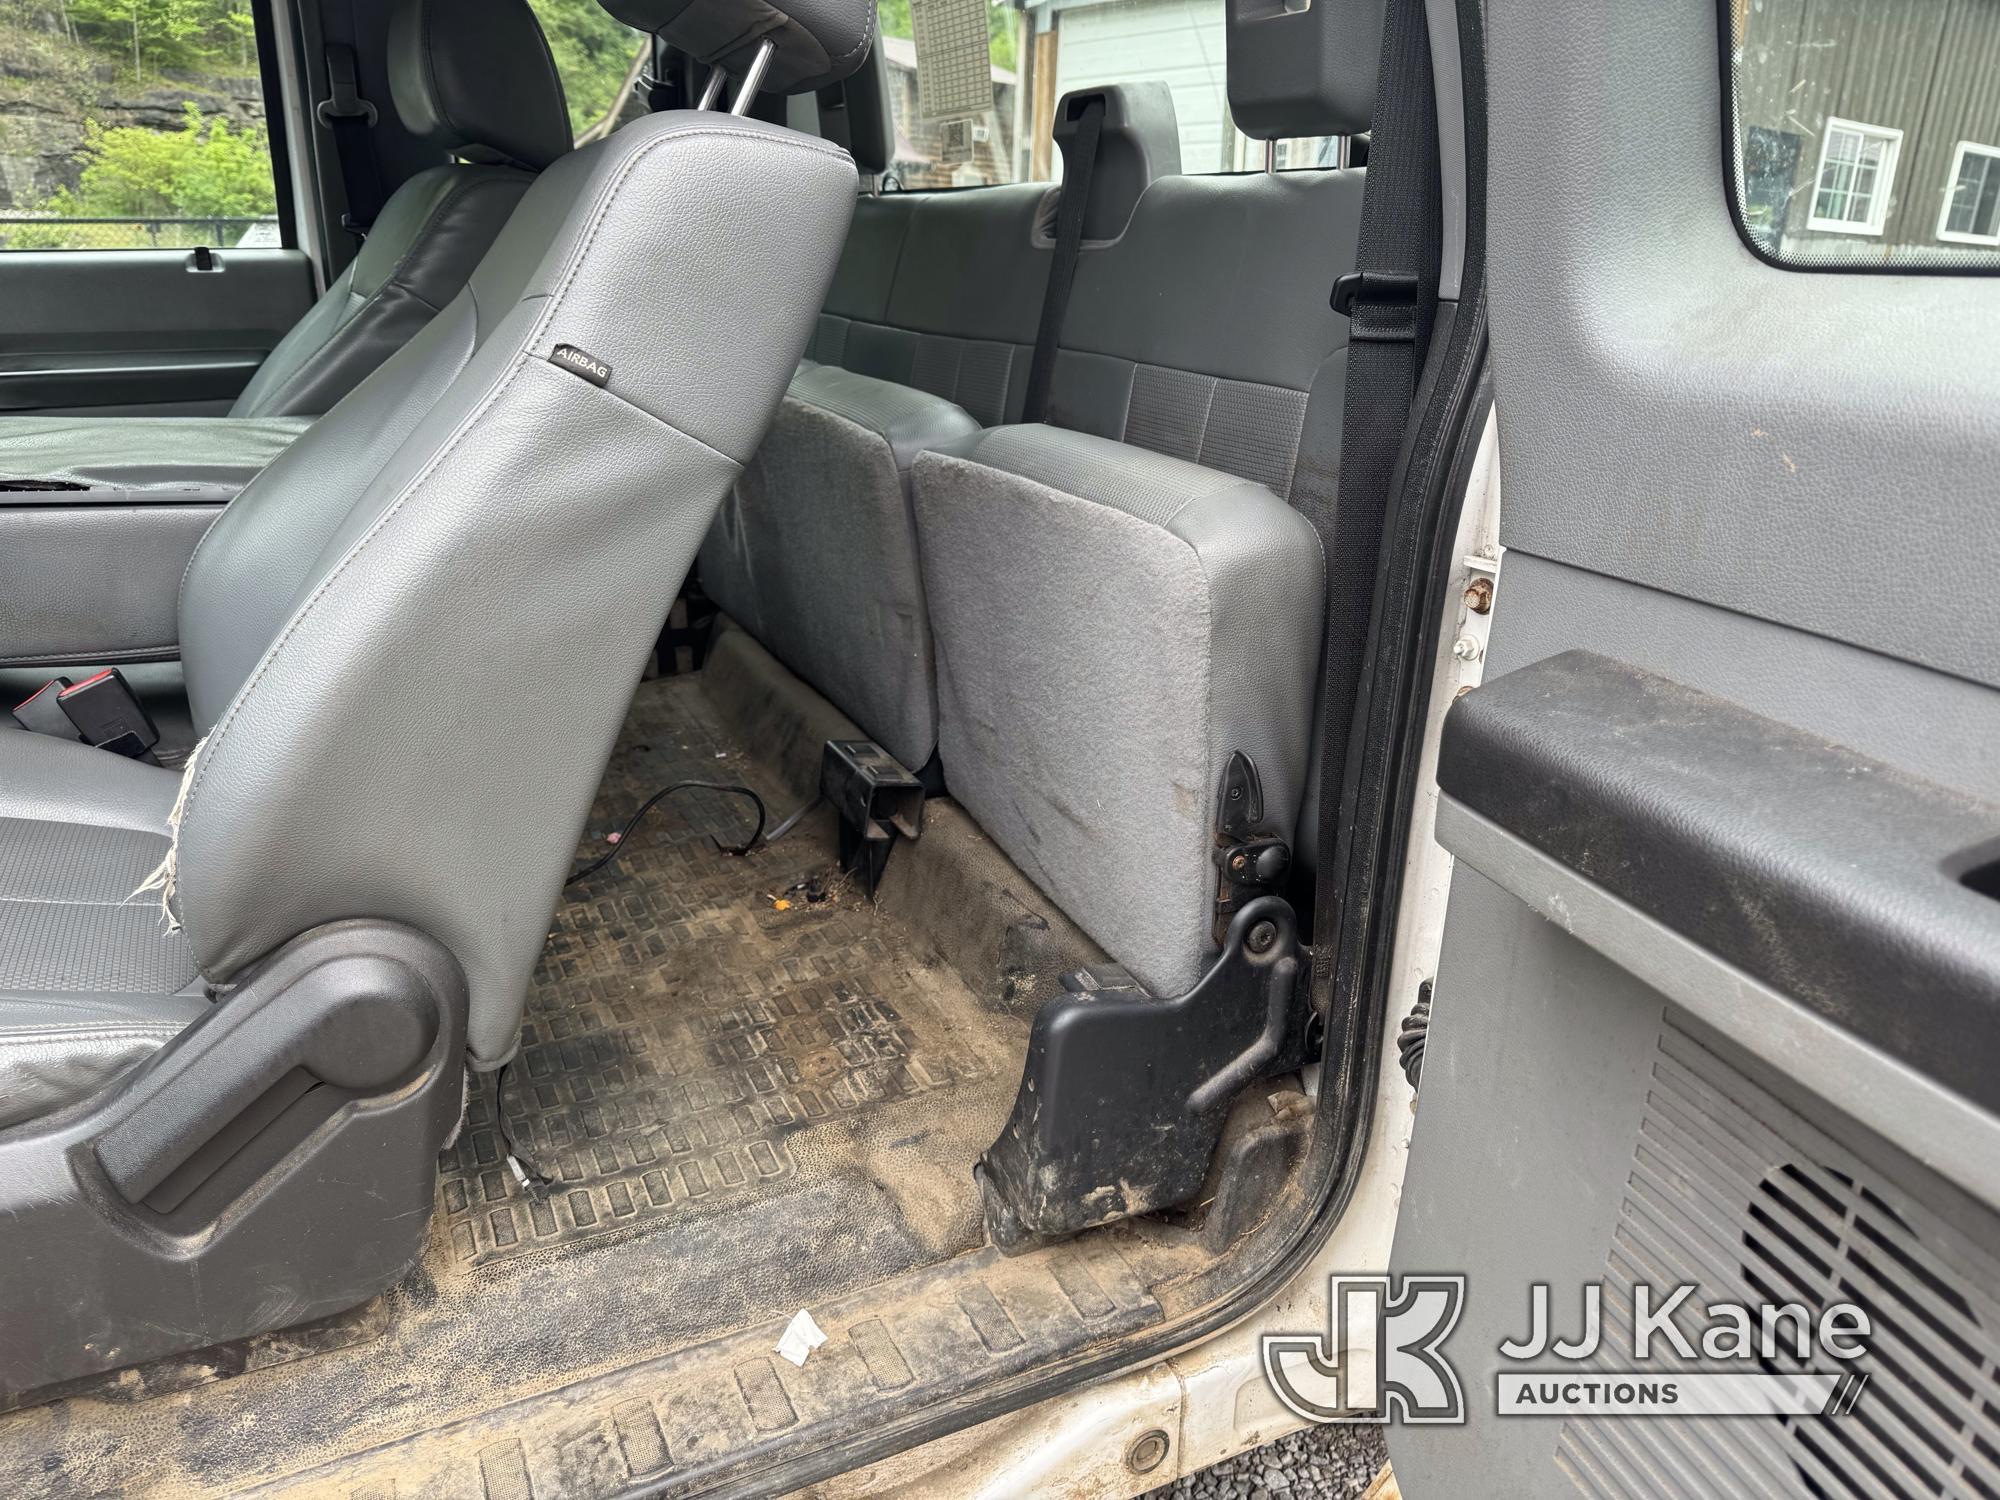 (Hanover, WV) 2015 Ford F250 4x4 Extended-Cab Pickup Truck Runs & Moves) (Jump To Start, Minor Body